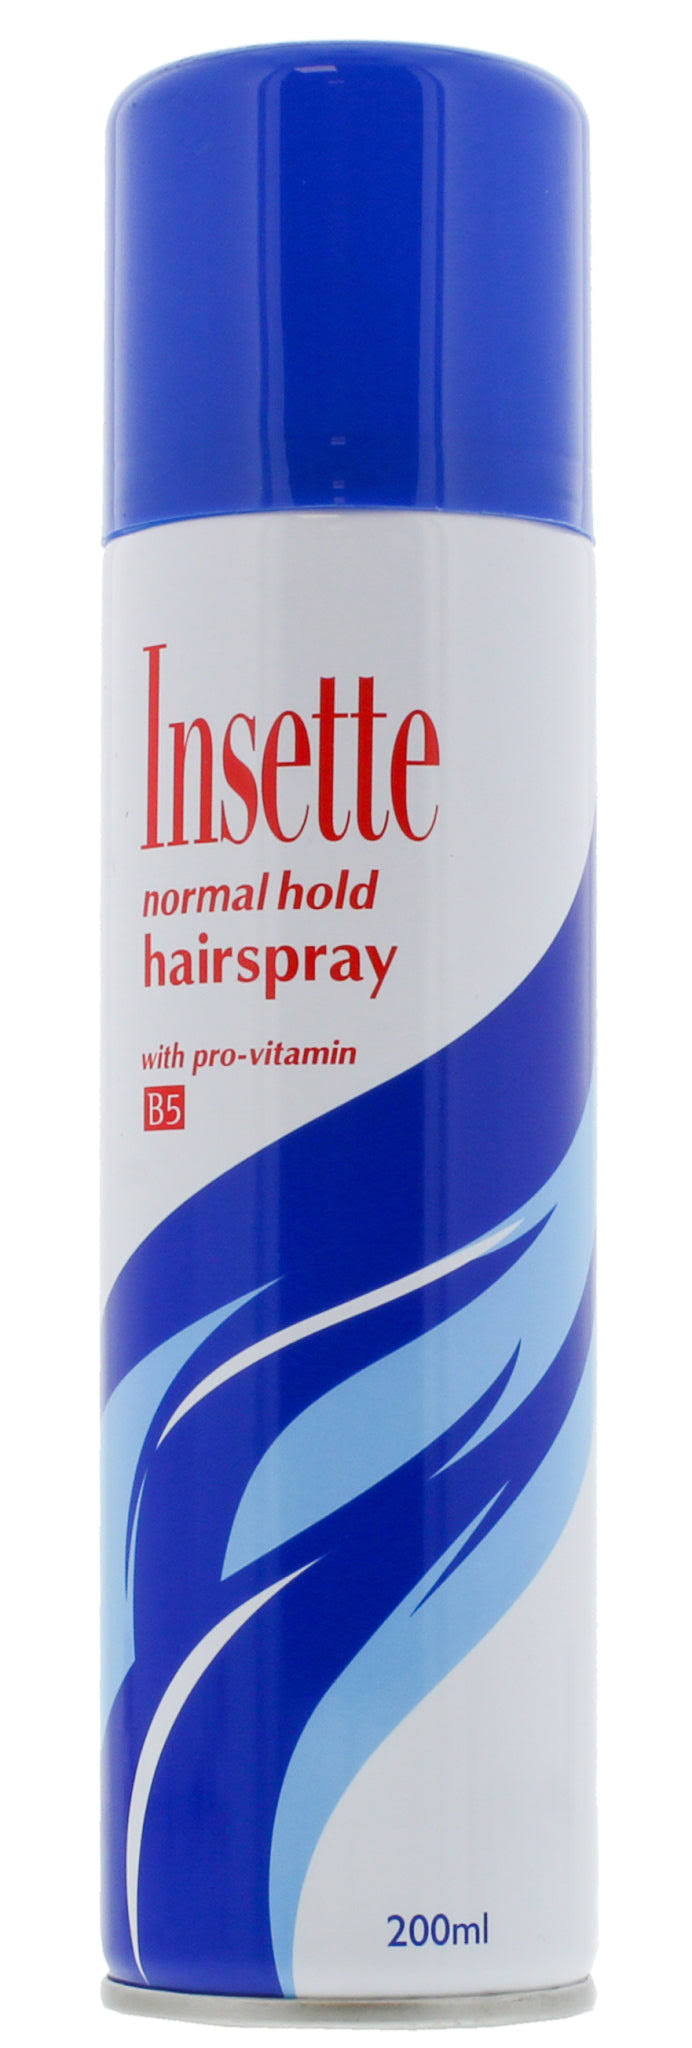 12 x Insette 200ml Hairspray Normal Hold - 01/11/2023 - Use